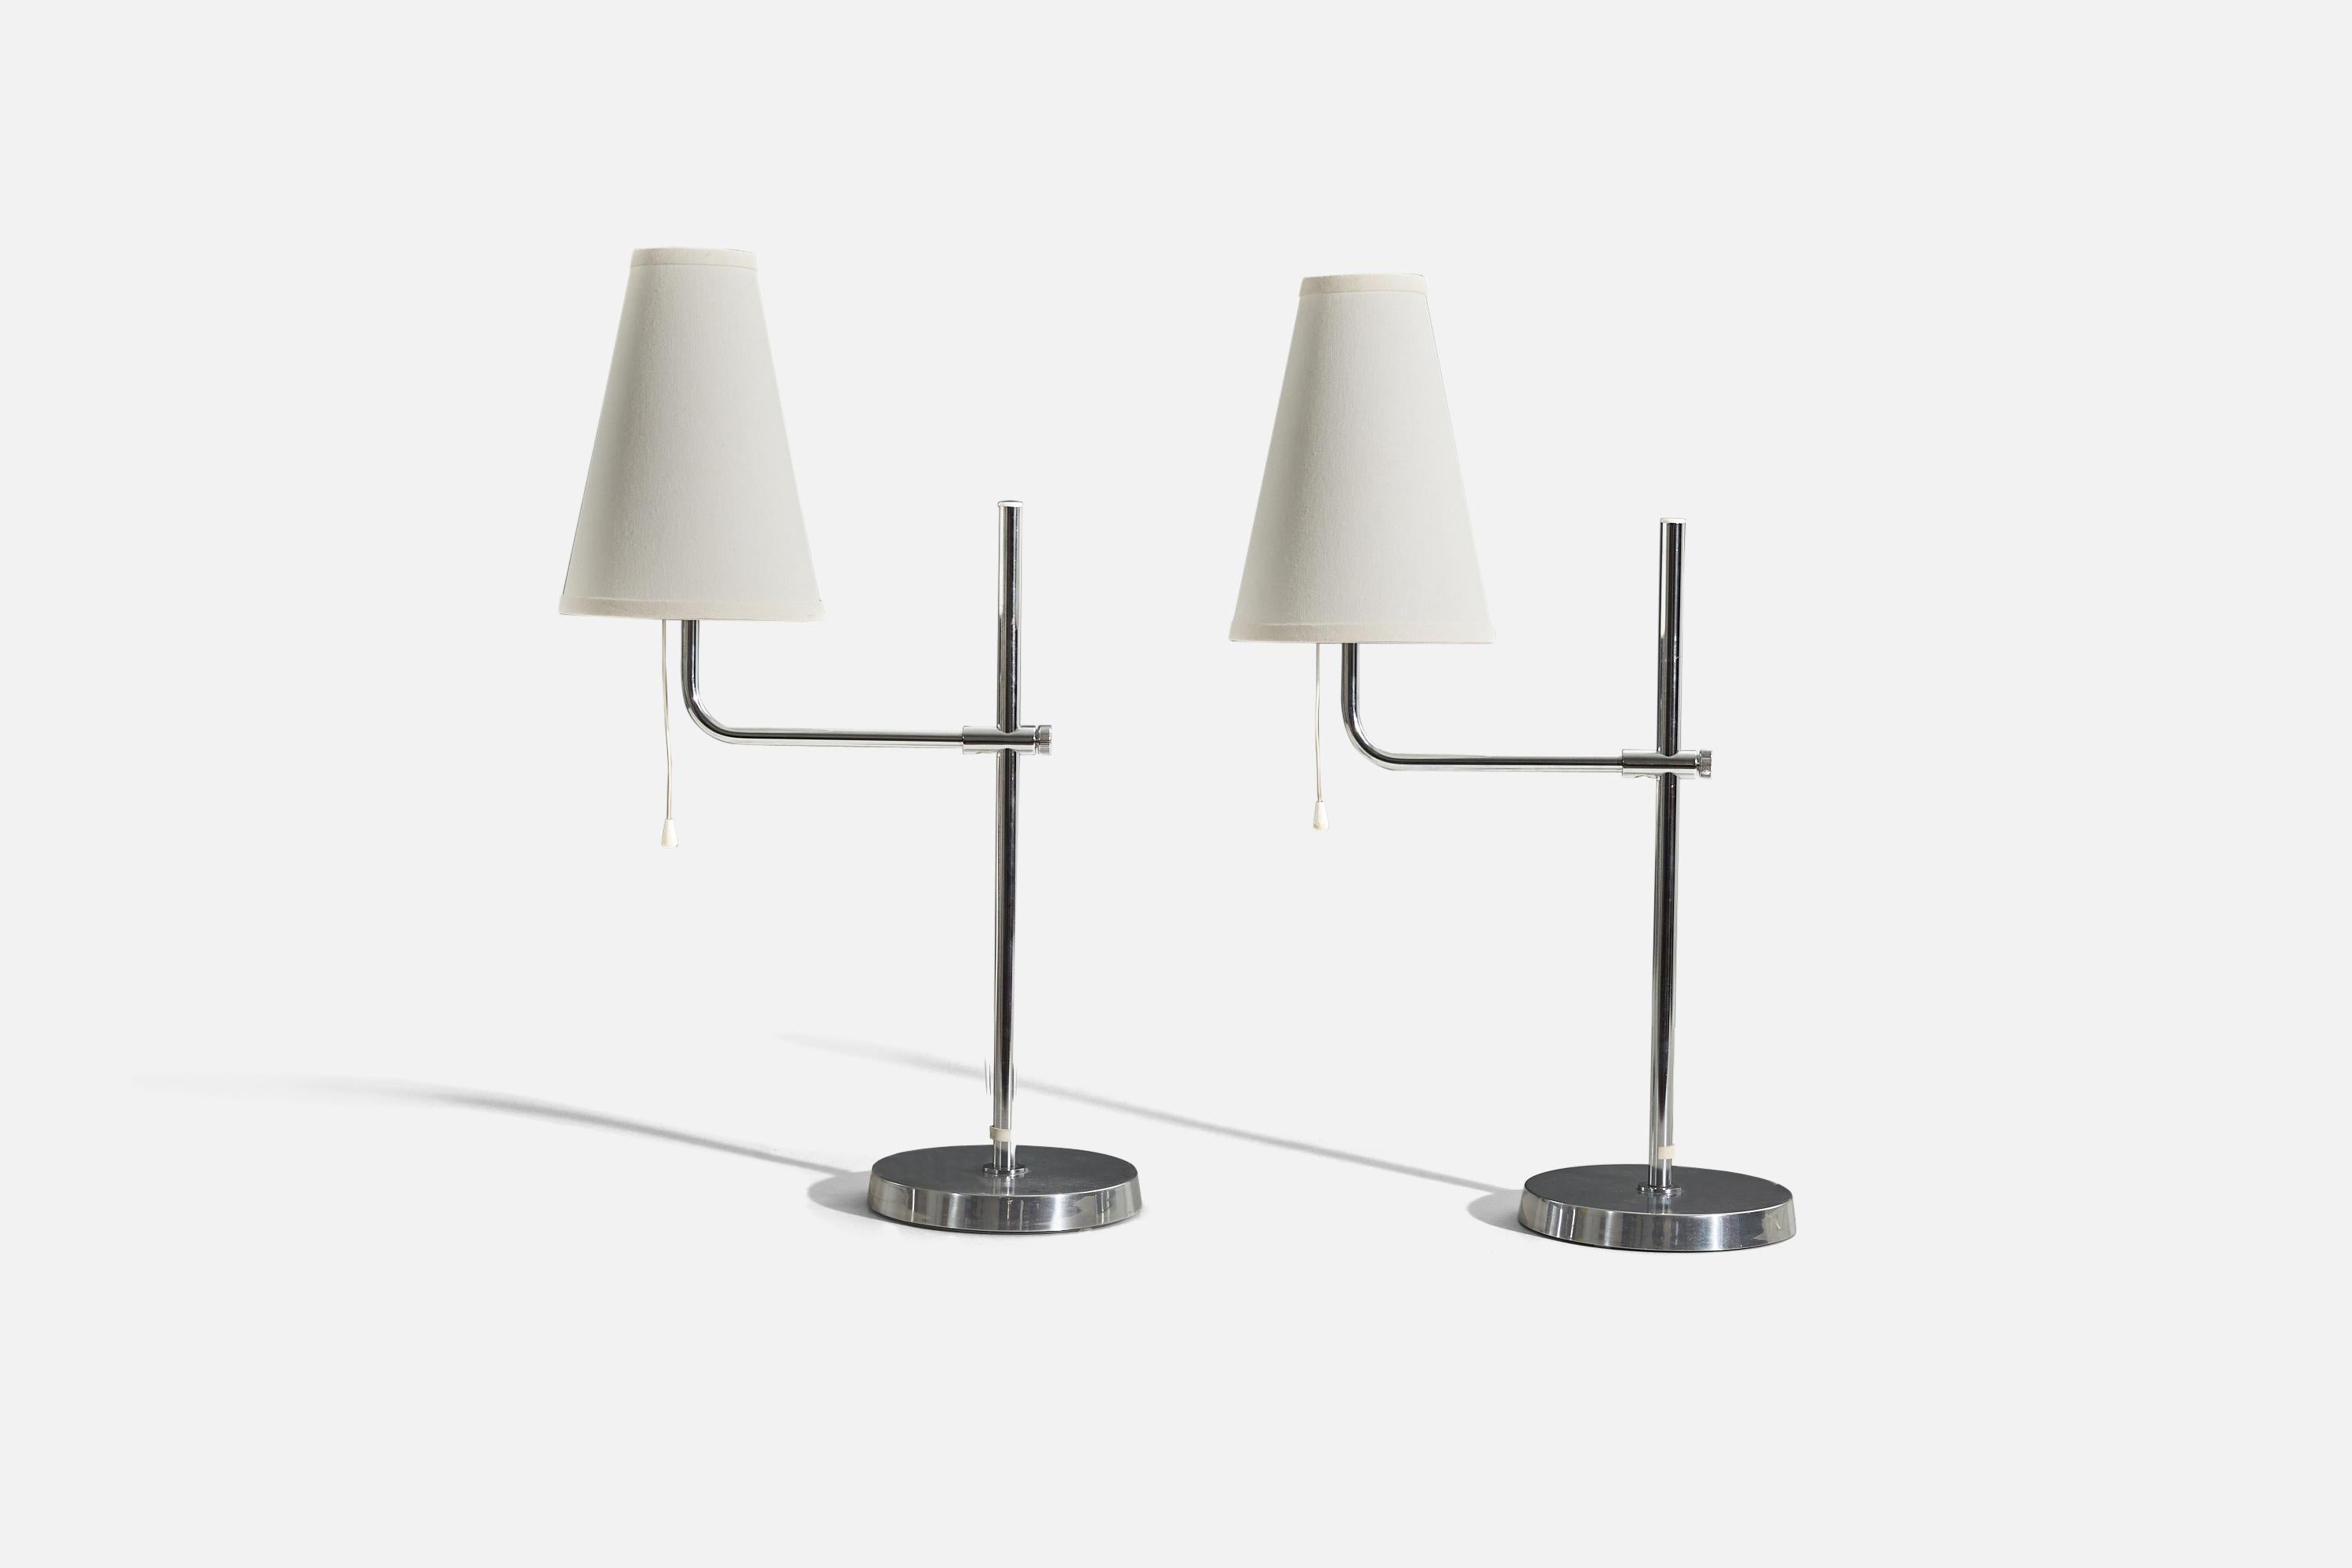 A pair of chrome and fabric table lamps designed and produced by Bergboms, Sweden, c. 1970s.

Variable dimensions, measured as illustrated in the first image. 

Sold without lampshade. 
Dimensions of Lamp (inches) : 19.5 x 7.62 x 14 (H x W x